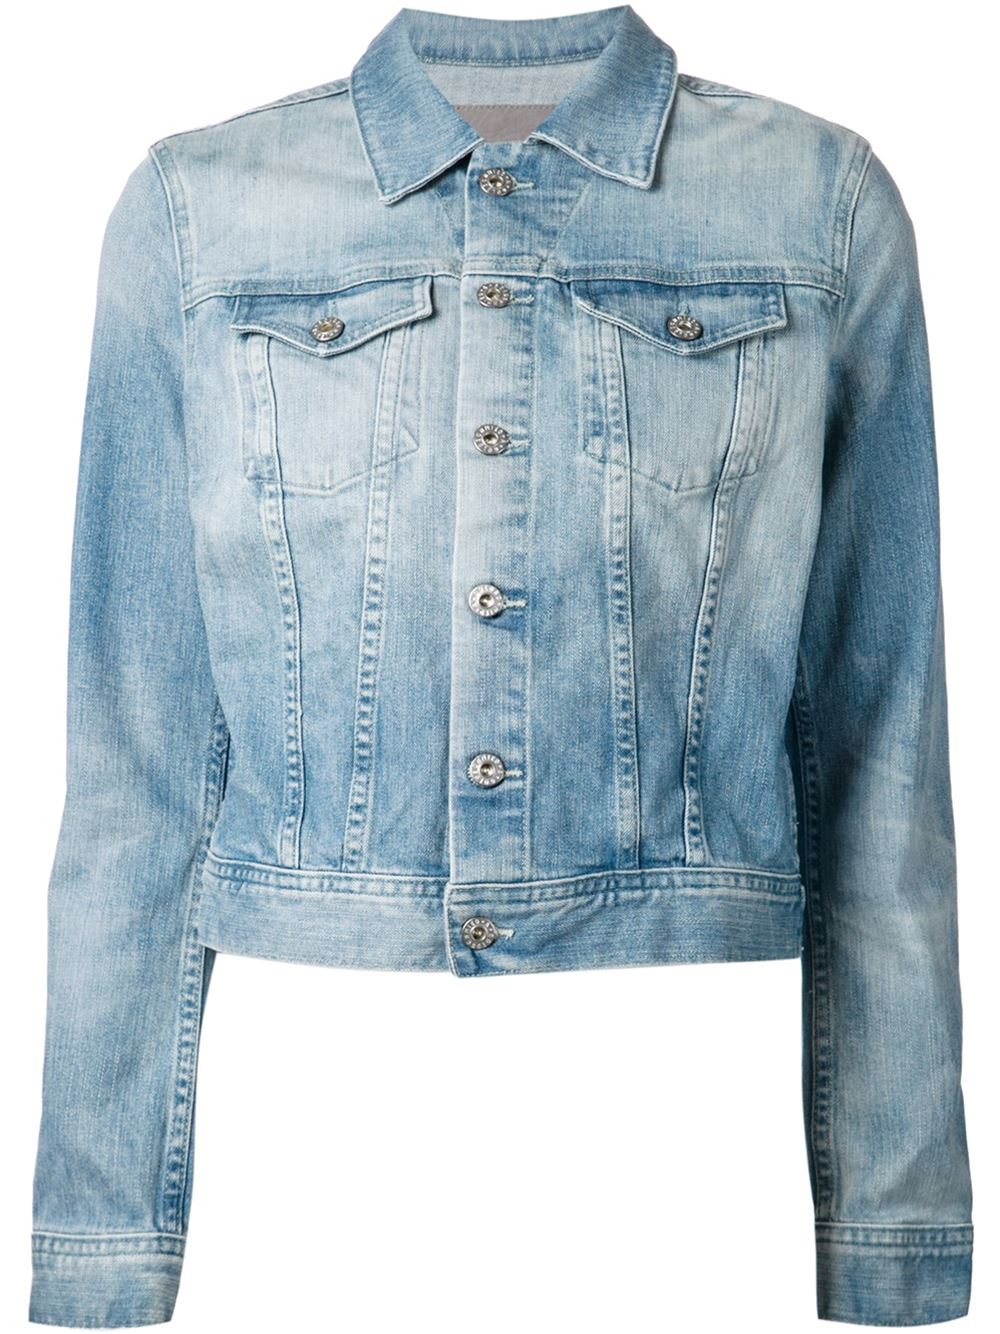 Ag adriano goldschmied Washed Jacket in Blue | Lyst